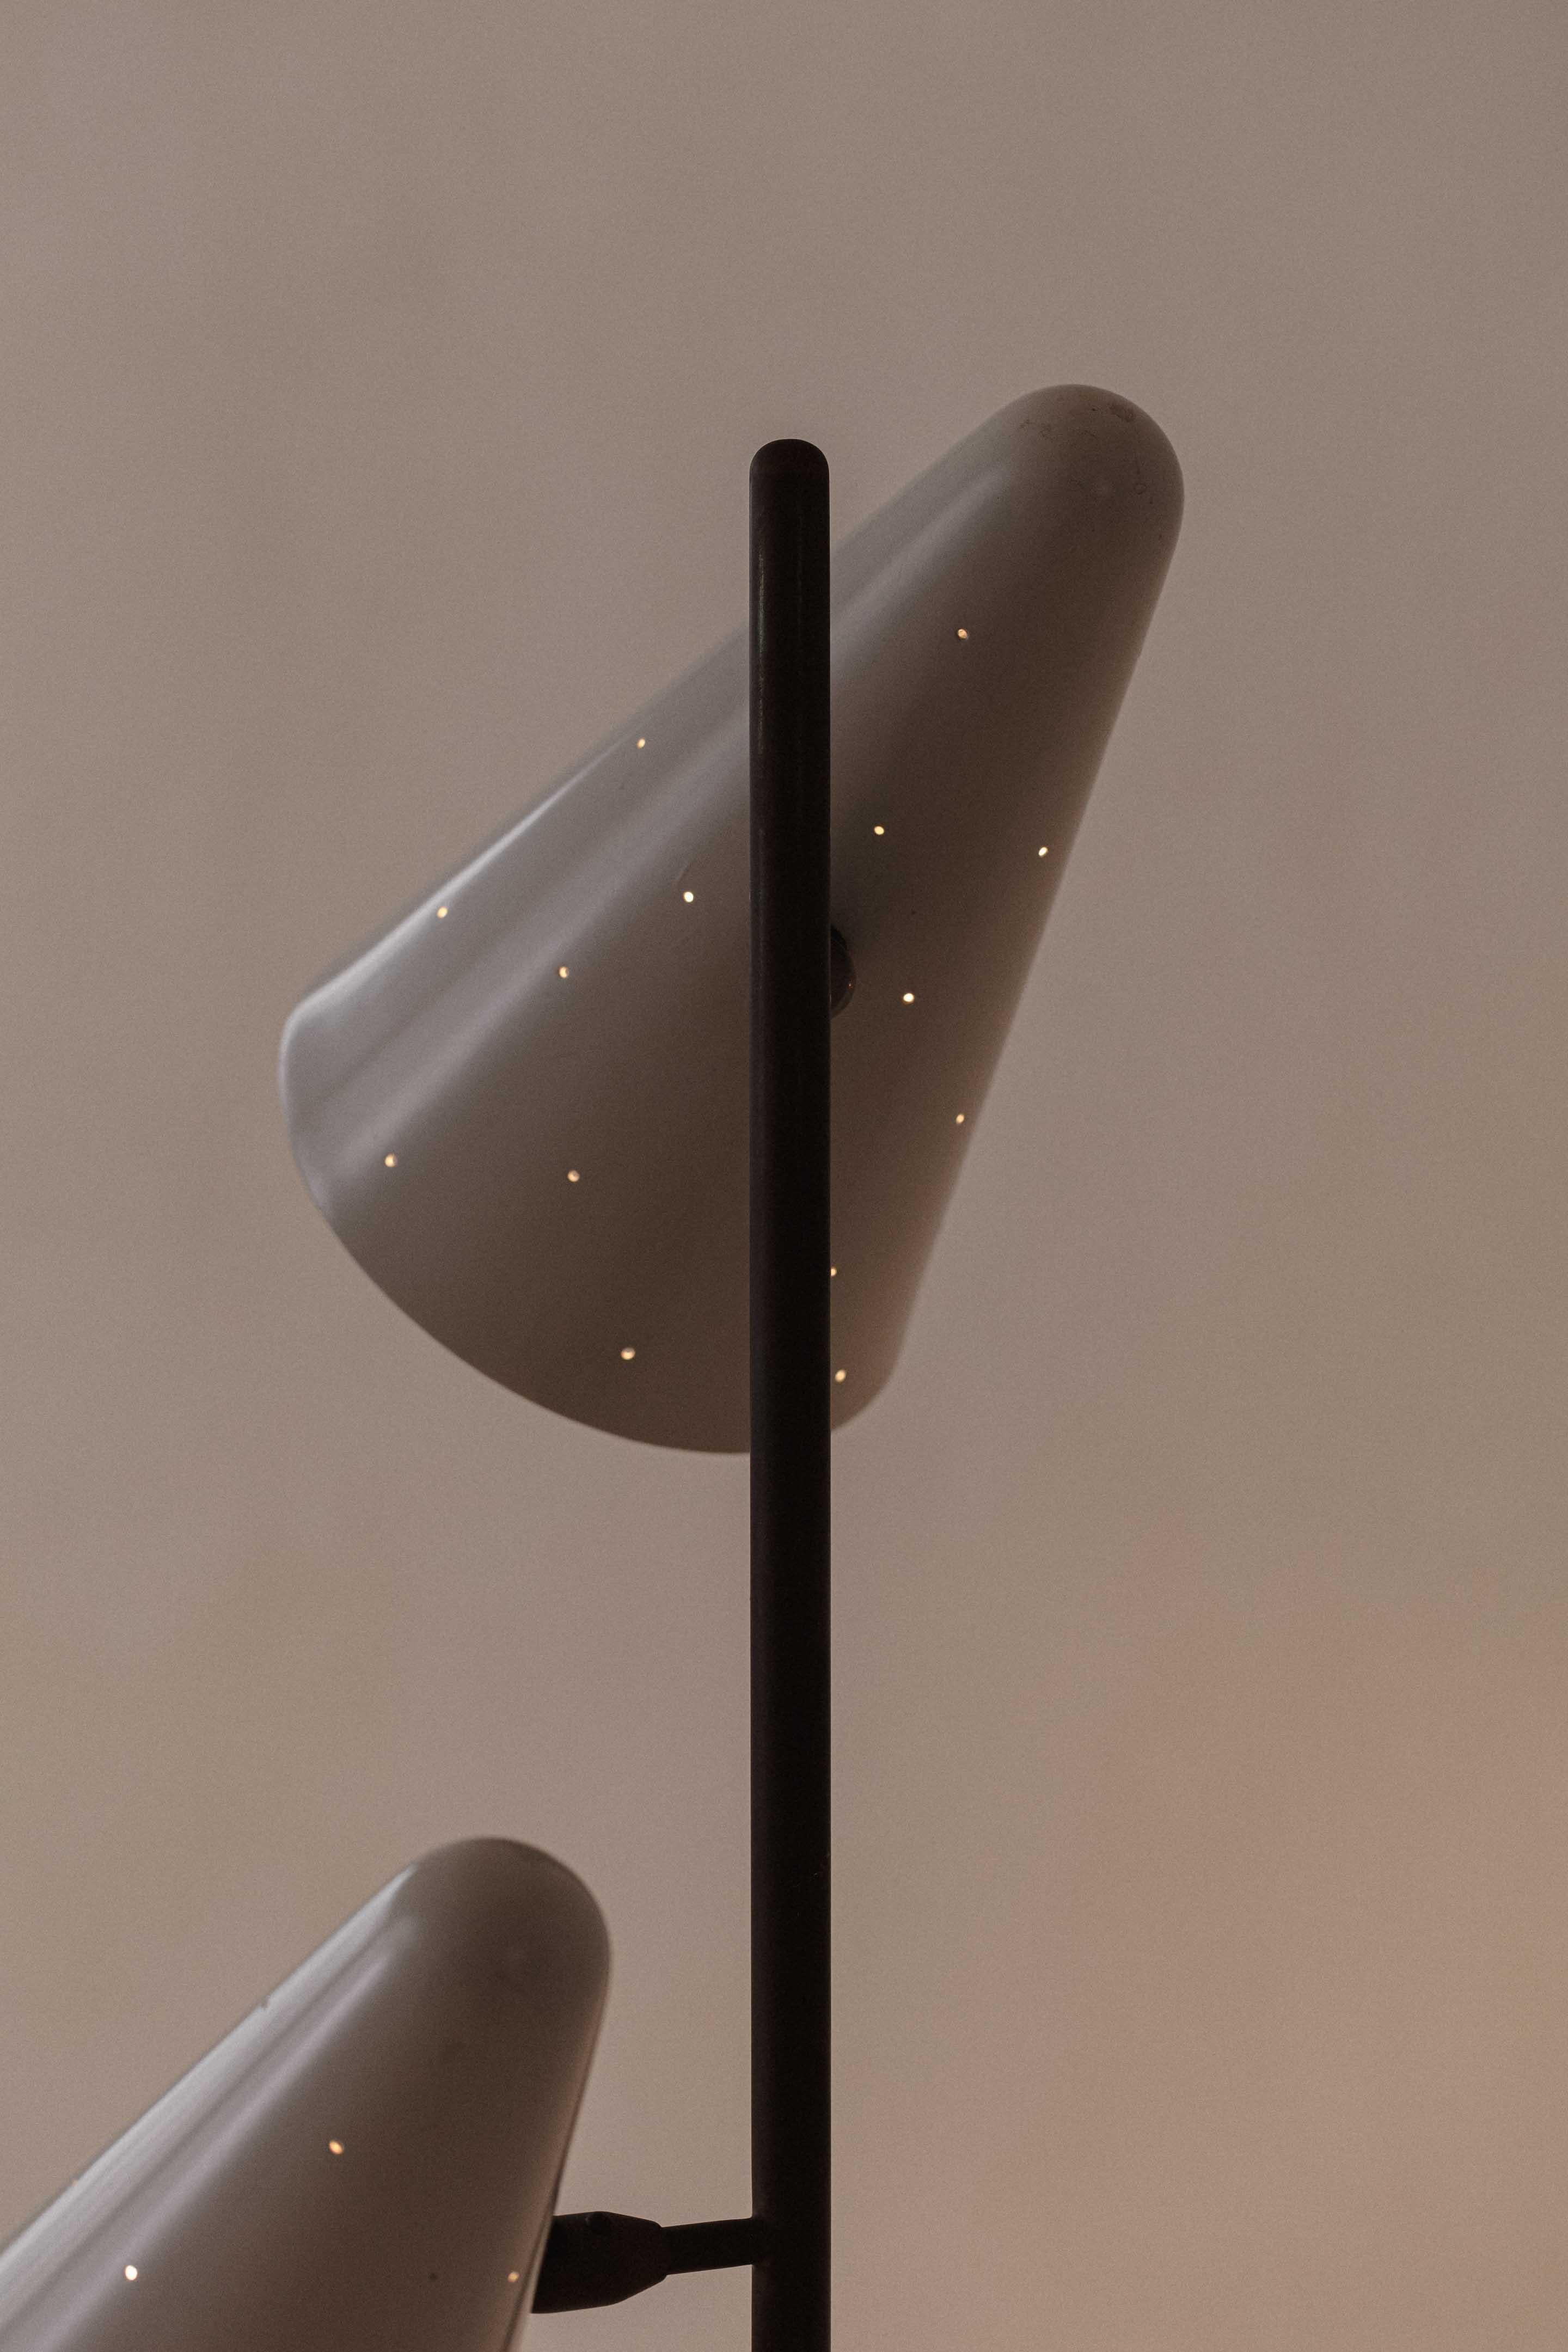 Mid-20th Century Floor Lamp, Design Attributed to Martin Eisler, Forma S.A., Brazil, 1950s For Sale